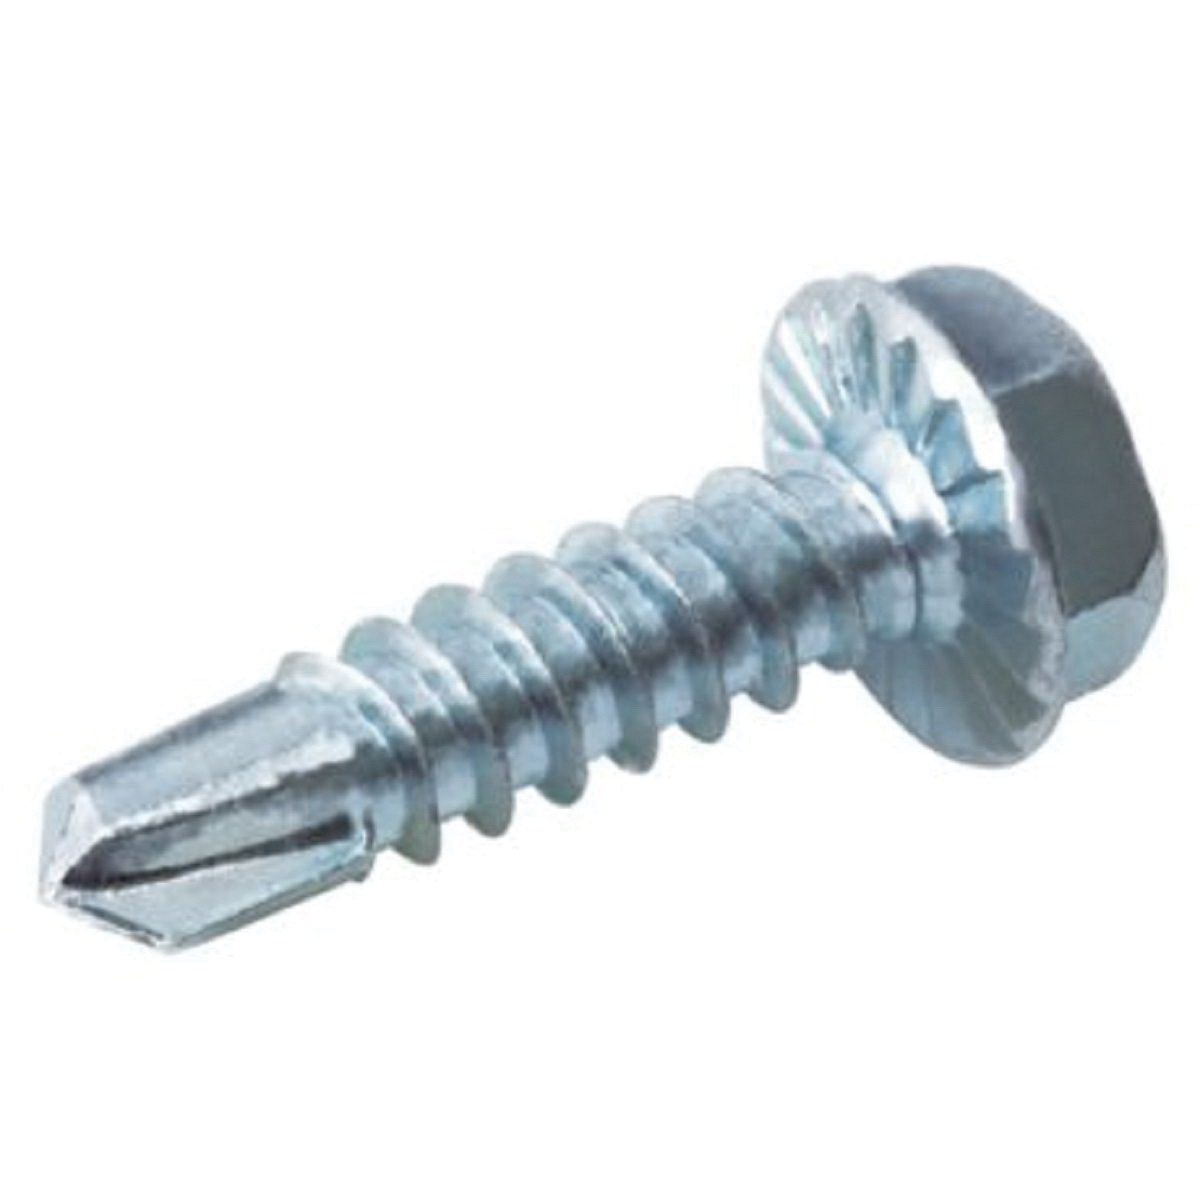 Duro Dyne® Pro Point 14340 Self Piercing Screw, #8 Thread, 1/2 in OAL, Hexagonal Head, 1/4 in Drive, Unslotted Drive